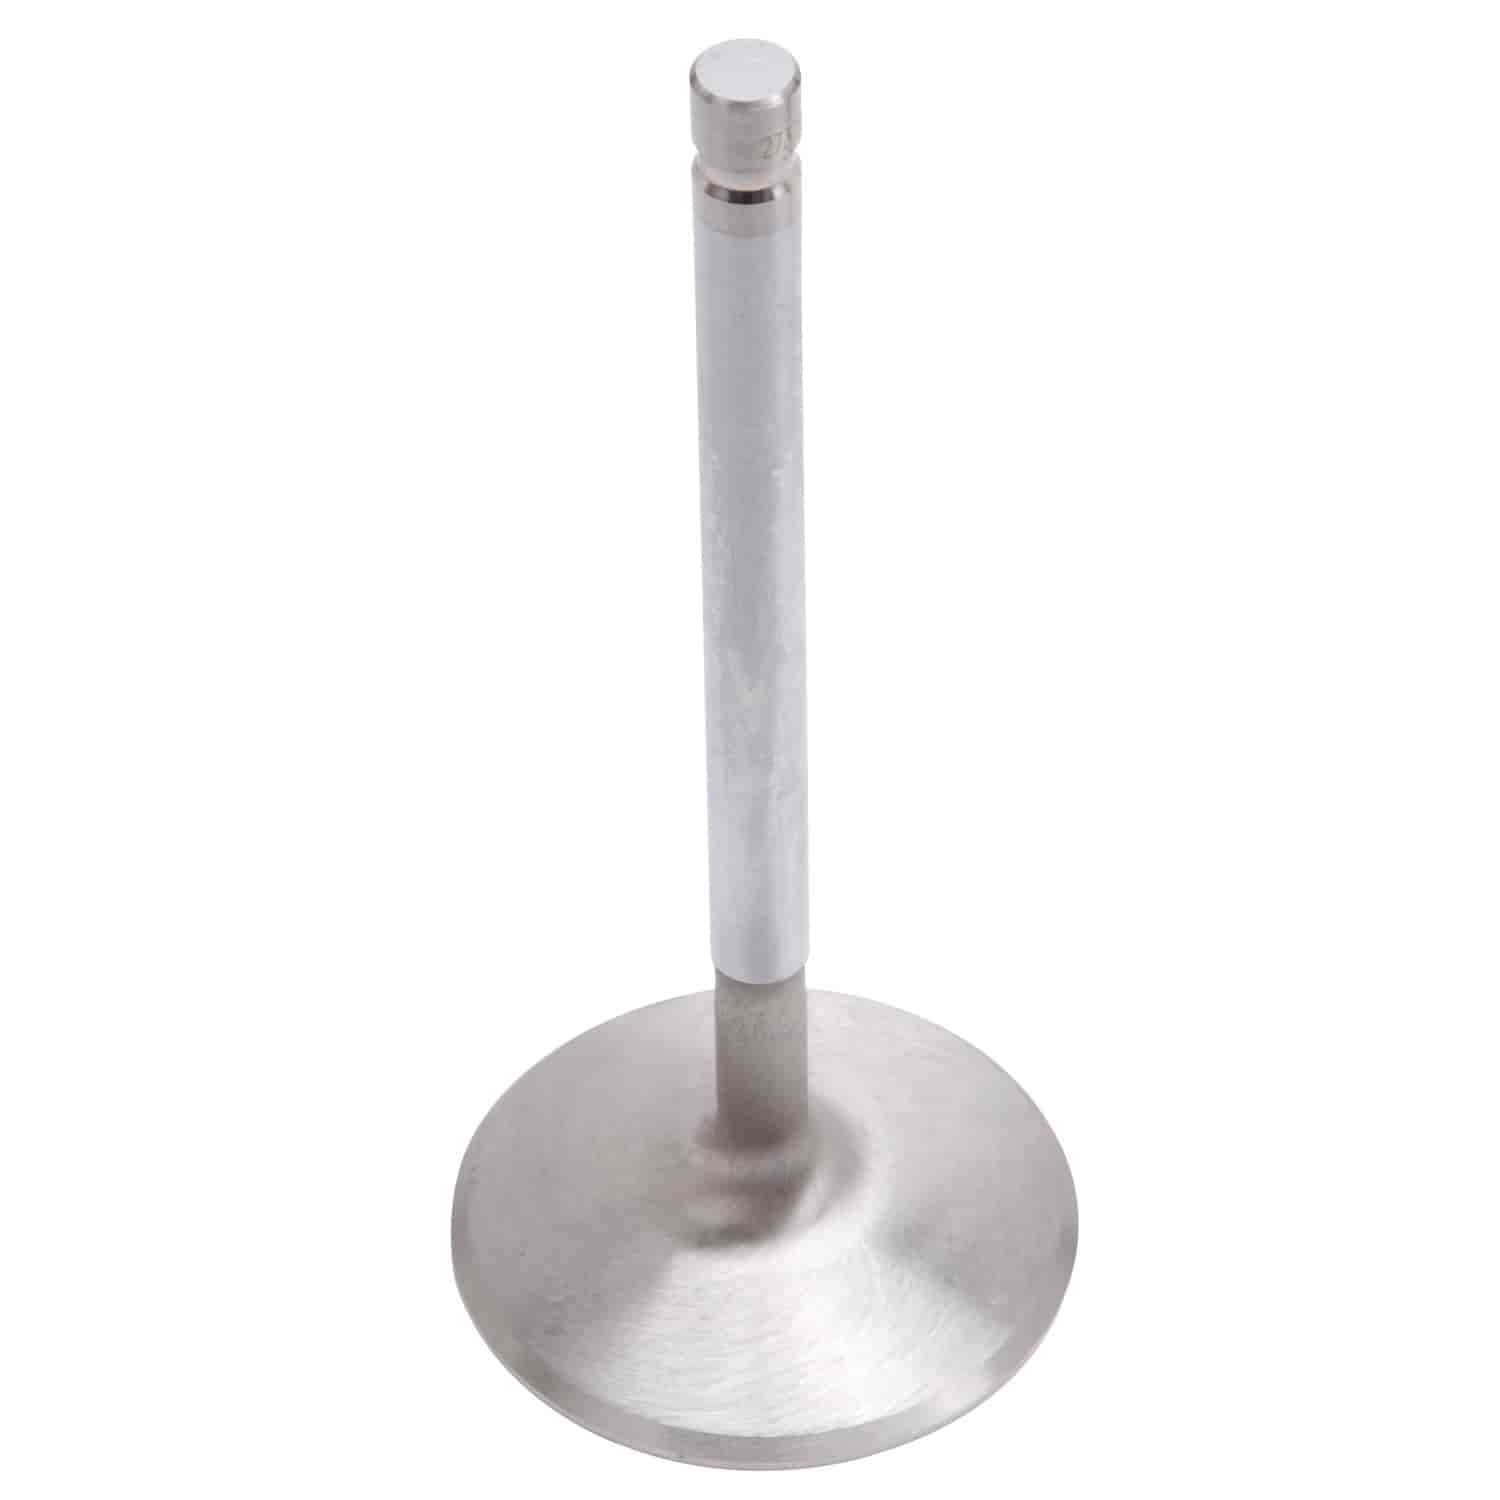 Single Intake Valve 2.19" for Big Block Ford Performer RPM Heads #350-60679, 350-60699, 350-61669, & 350-61649